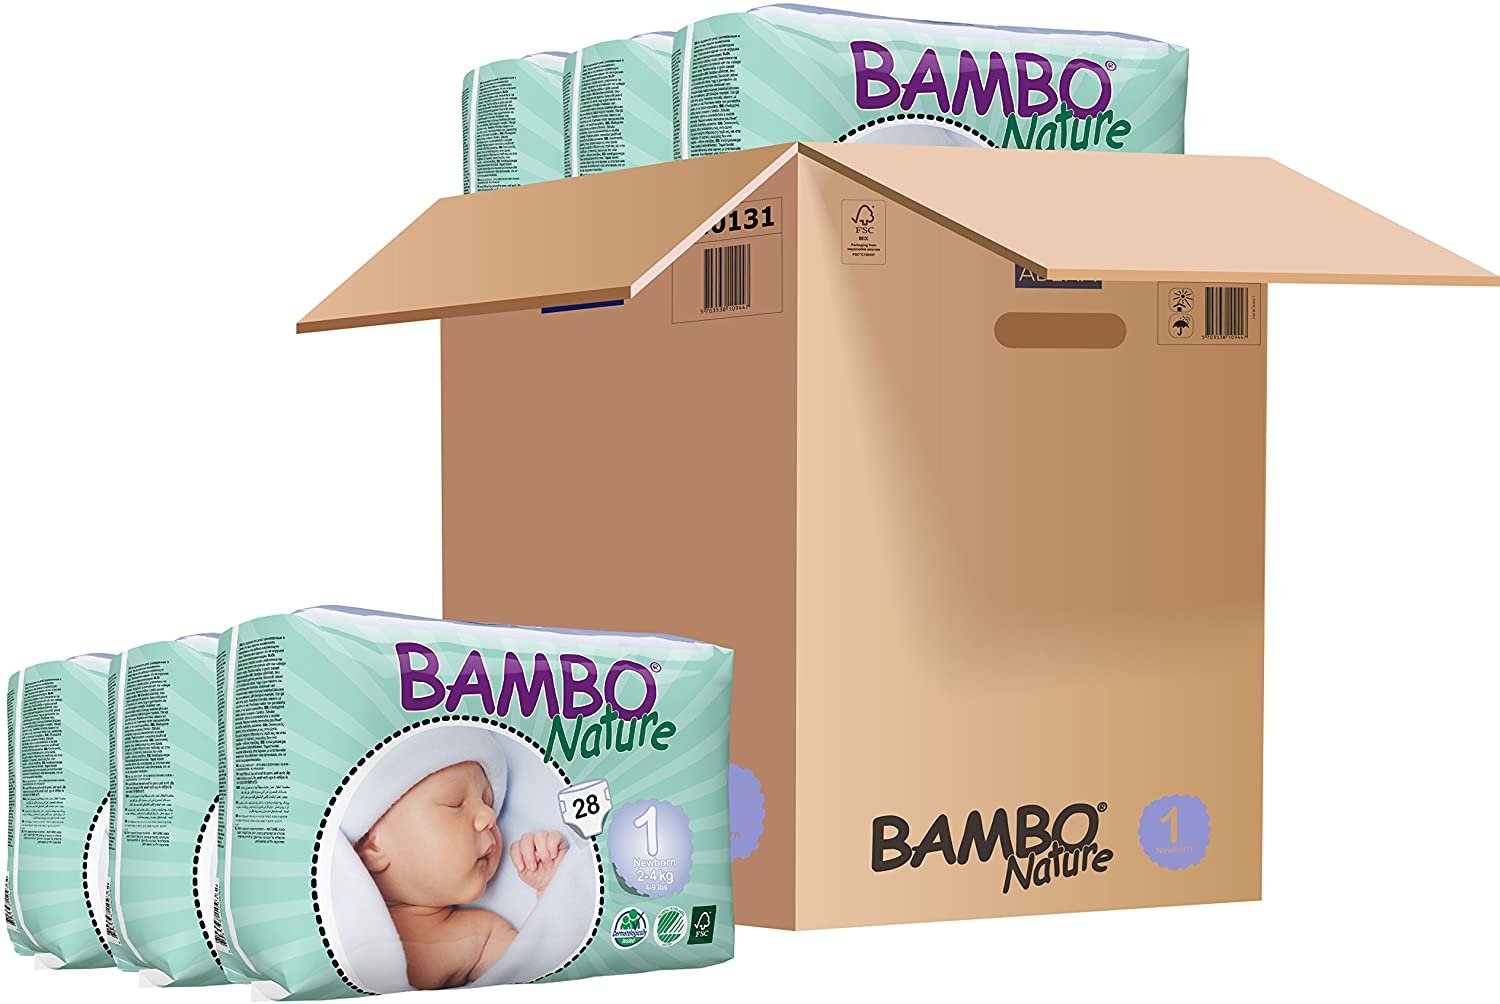 9. Bambo Nature Eco Friendly Baby Diapers 